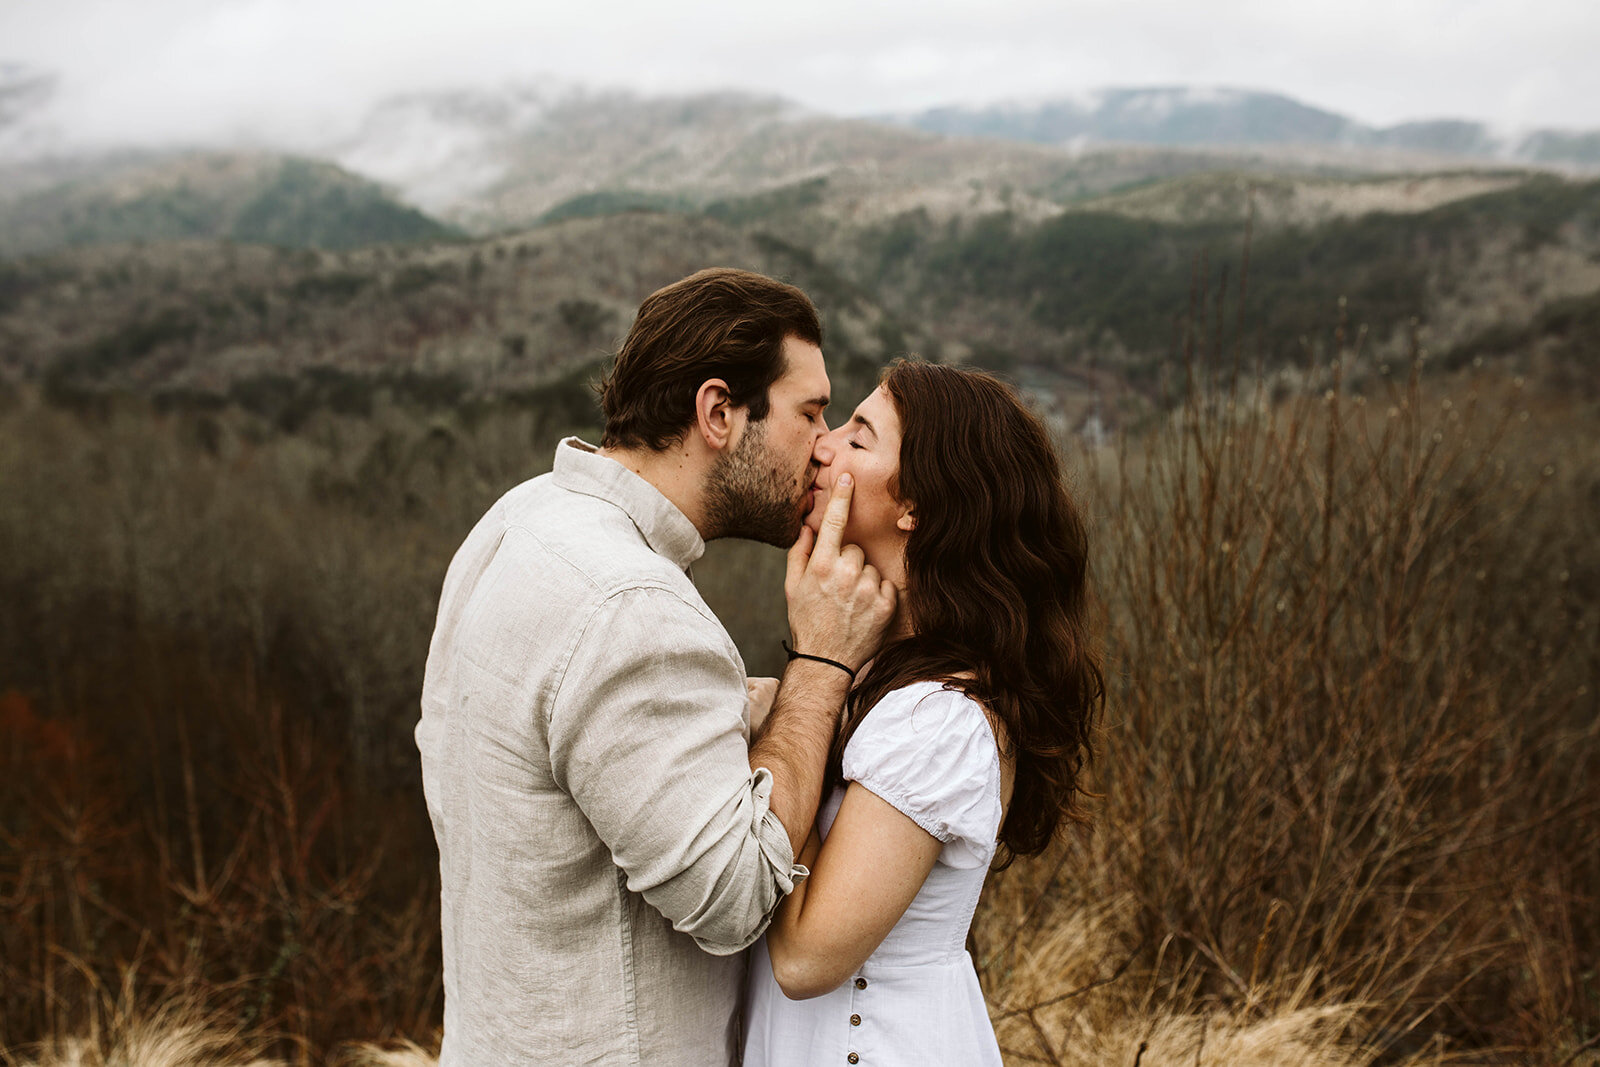 adventure-engagement-in-the-great-smoky-mountains-chattanooga-elopement-photographer5Y6A5370_websize.jpg